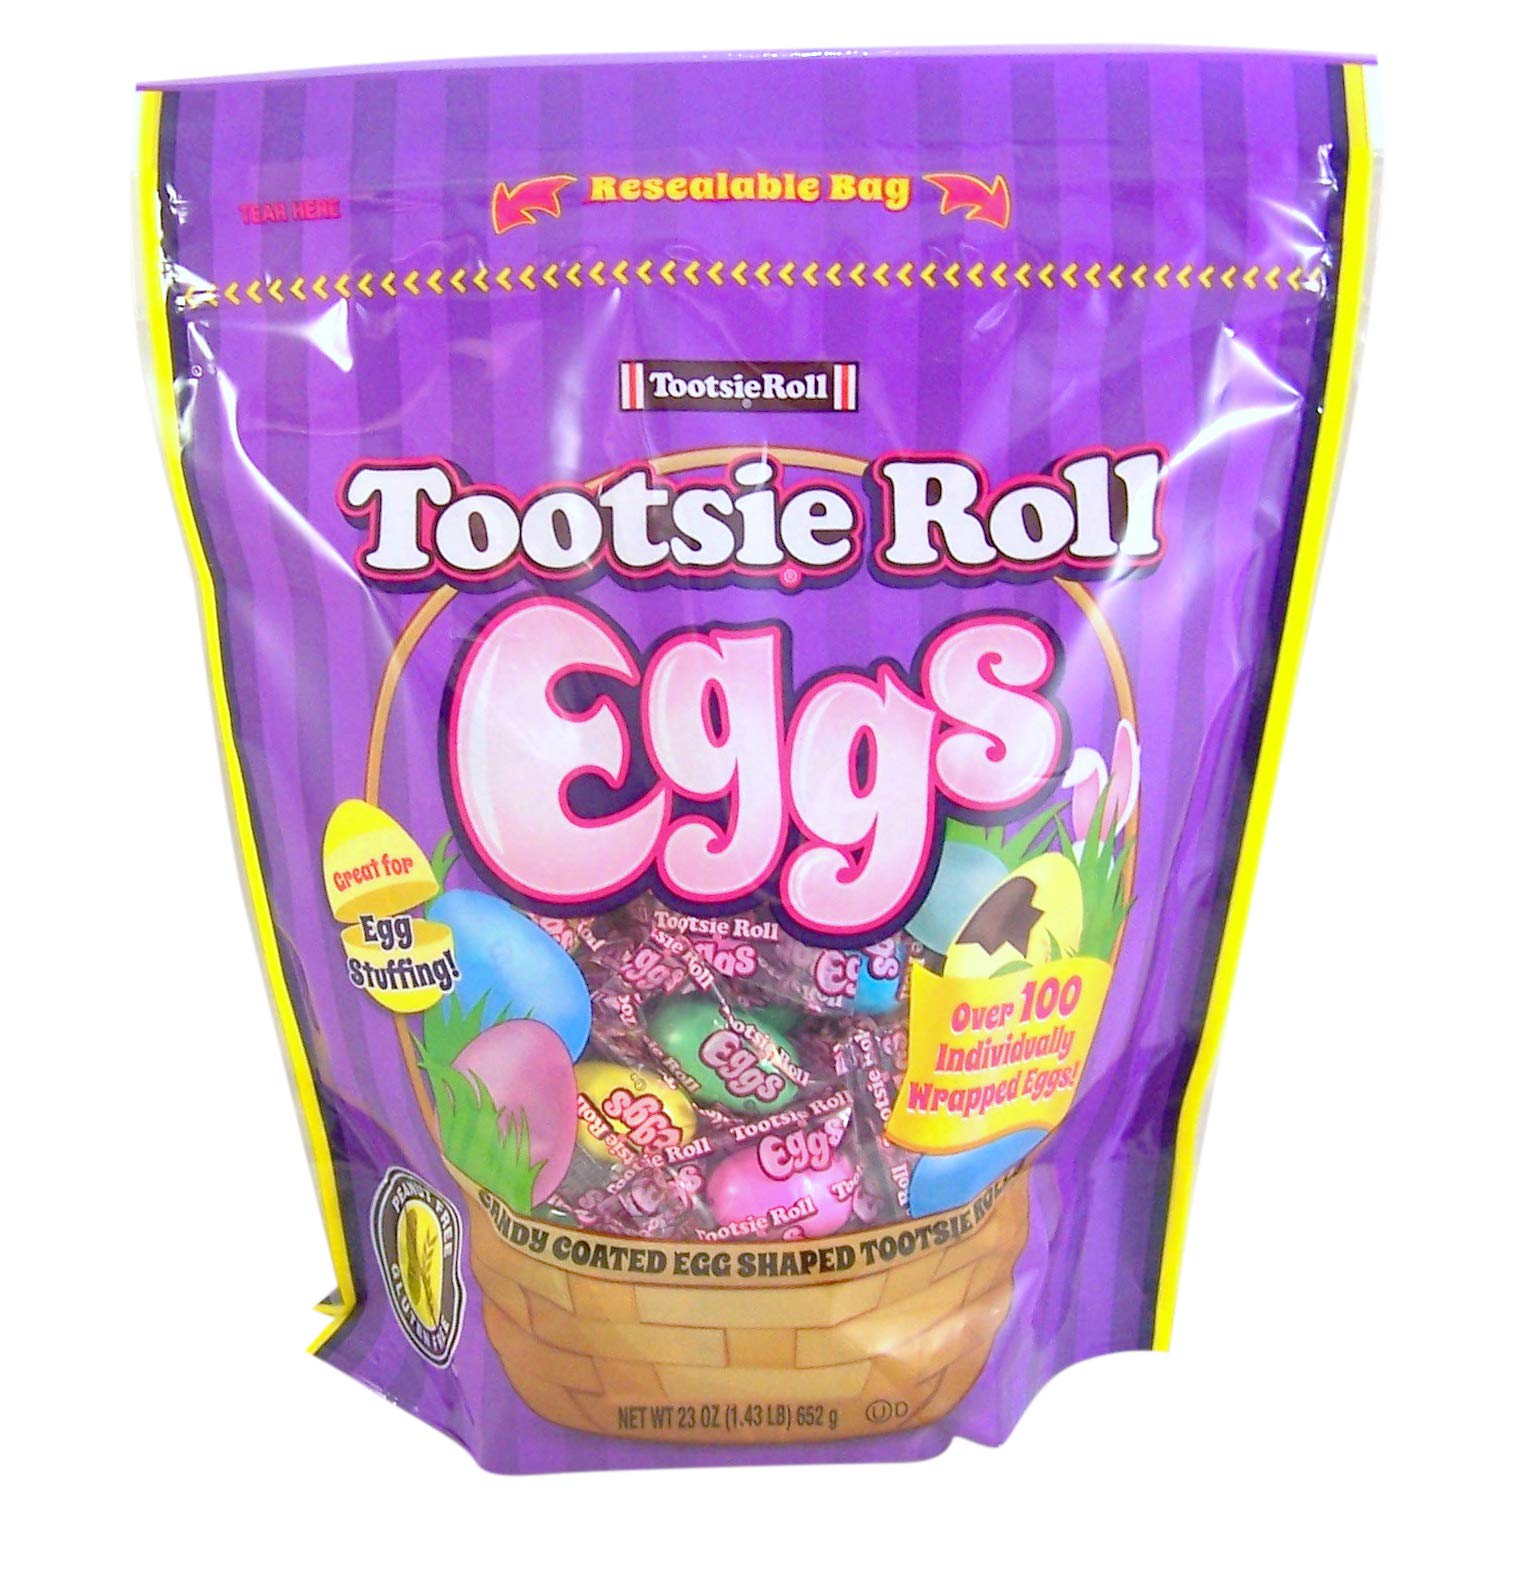 Tootsie Roll Eggs Candy Coated Egg Shaped Individually Wrapped Easter Candy, 23 oz Resealable Bag